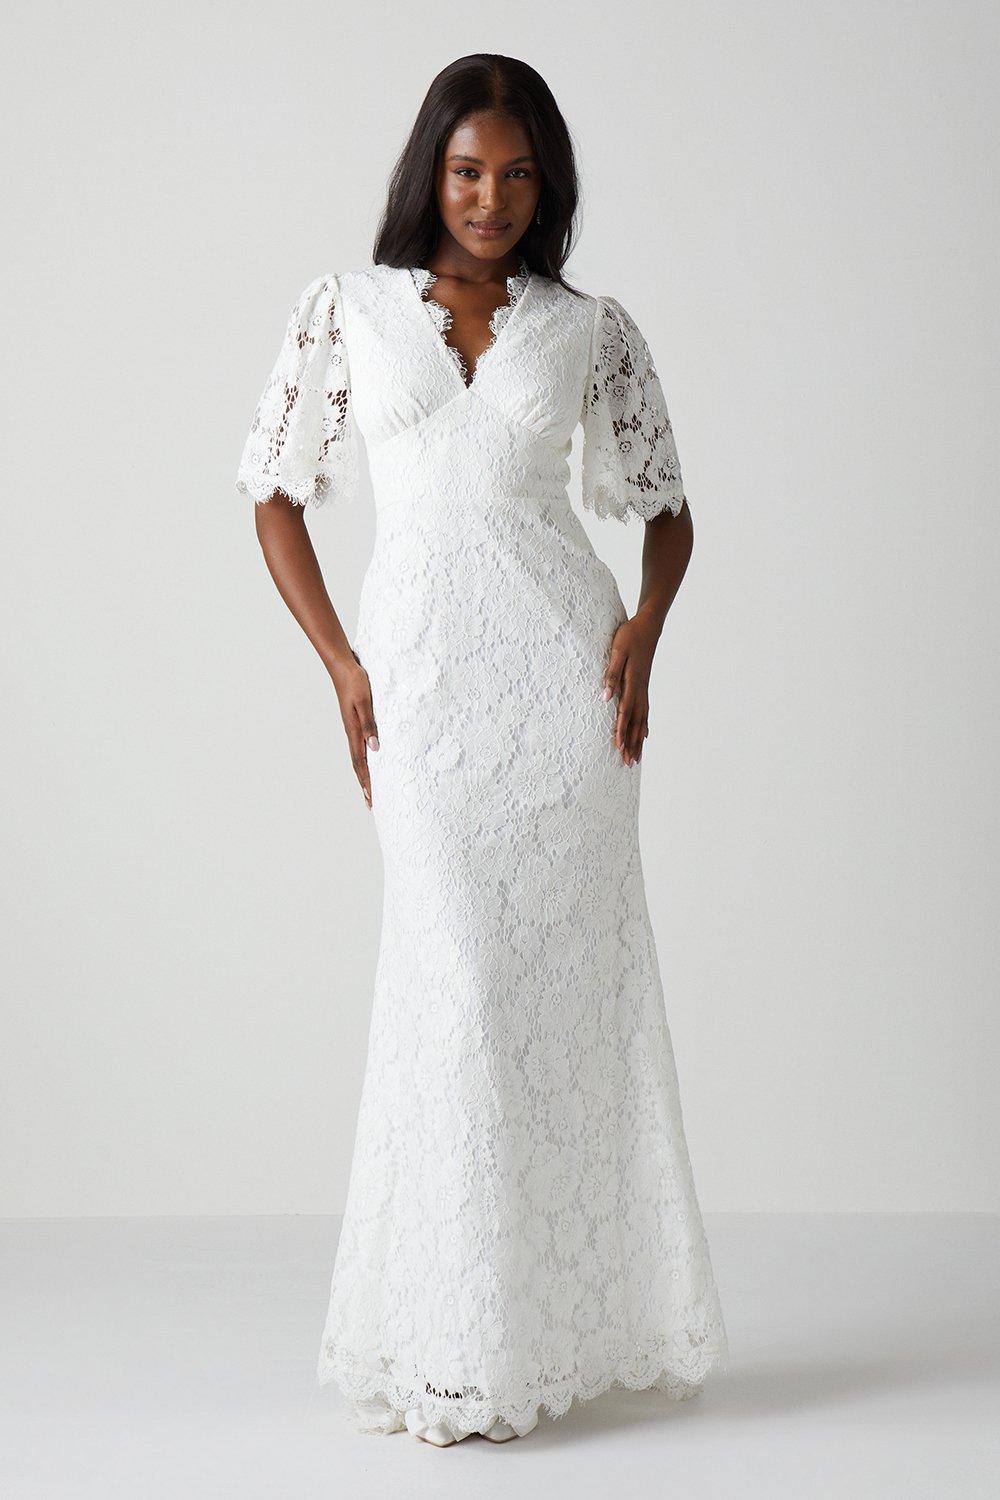 All Over Lace Angel Sleeve Fishtail Wedding Dress - Ivory